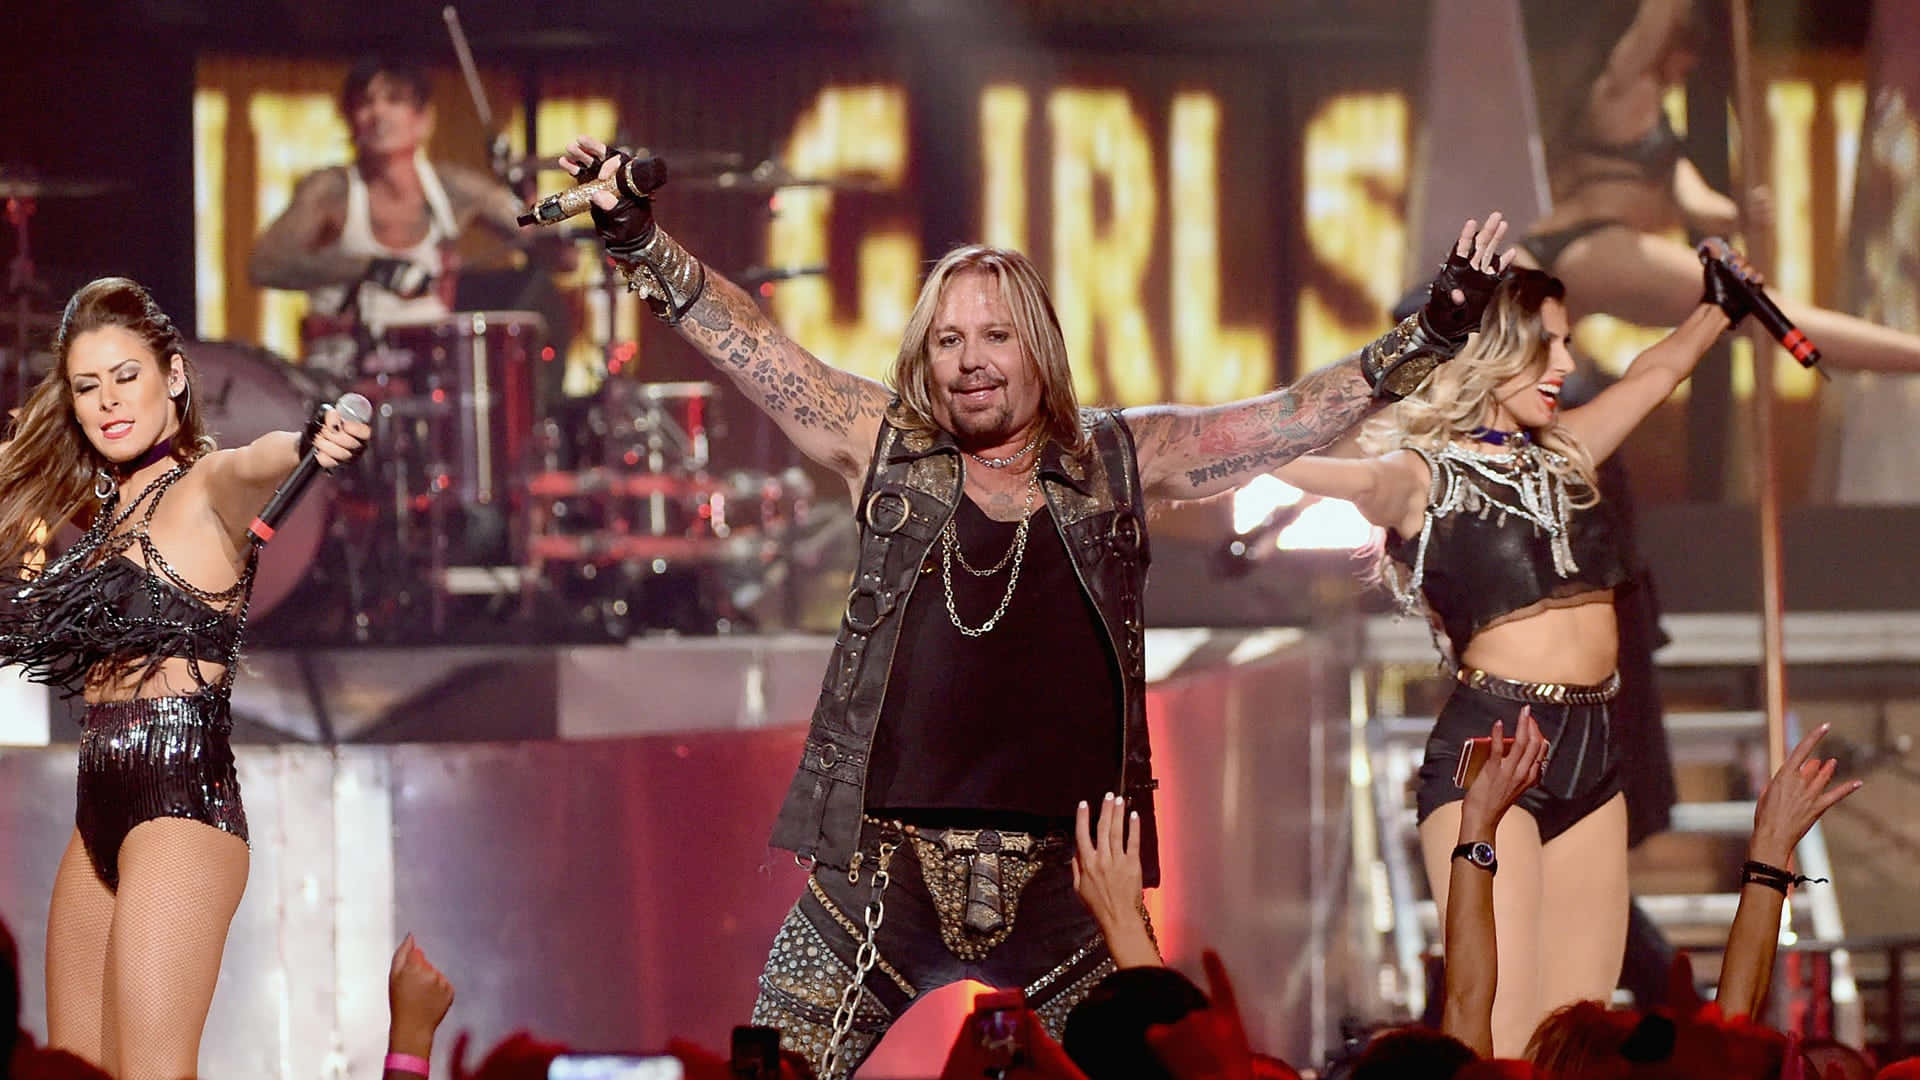 "Prepare for an Explosive Performance with Motley Crue" Wallpaper